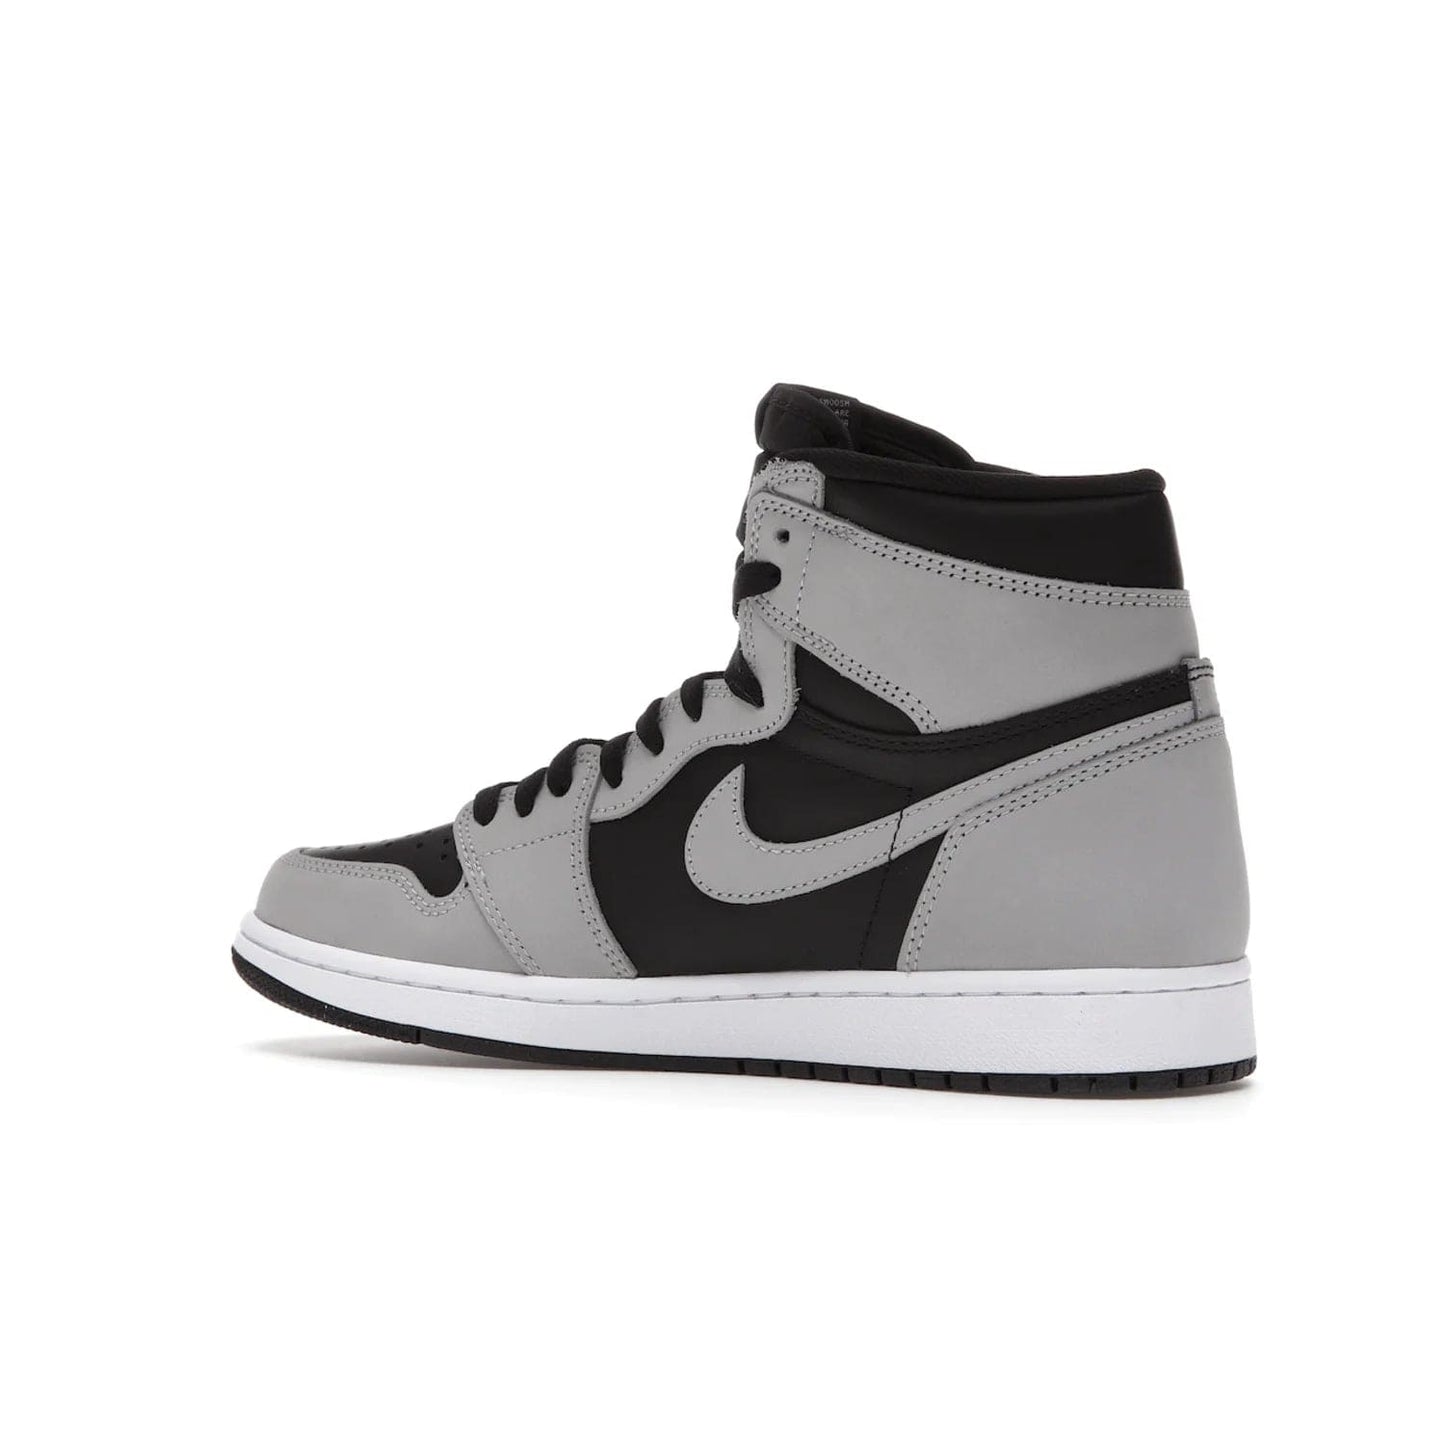 Jordan 1 Retro High Shadow 2.0 - Image 22 - Only at www.BallersClubKickz.com - #
Classic Air Jordan 1 Retro High Shadow 2.0 with black leather base and Light Smoke Grey overlays. Released in May 2021.